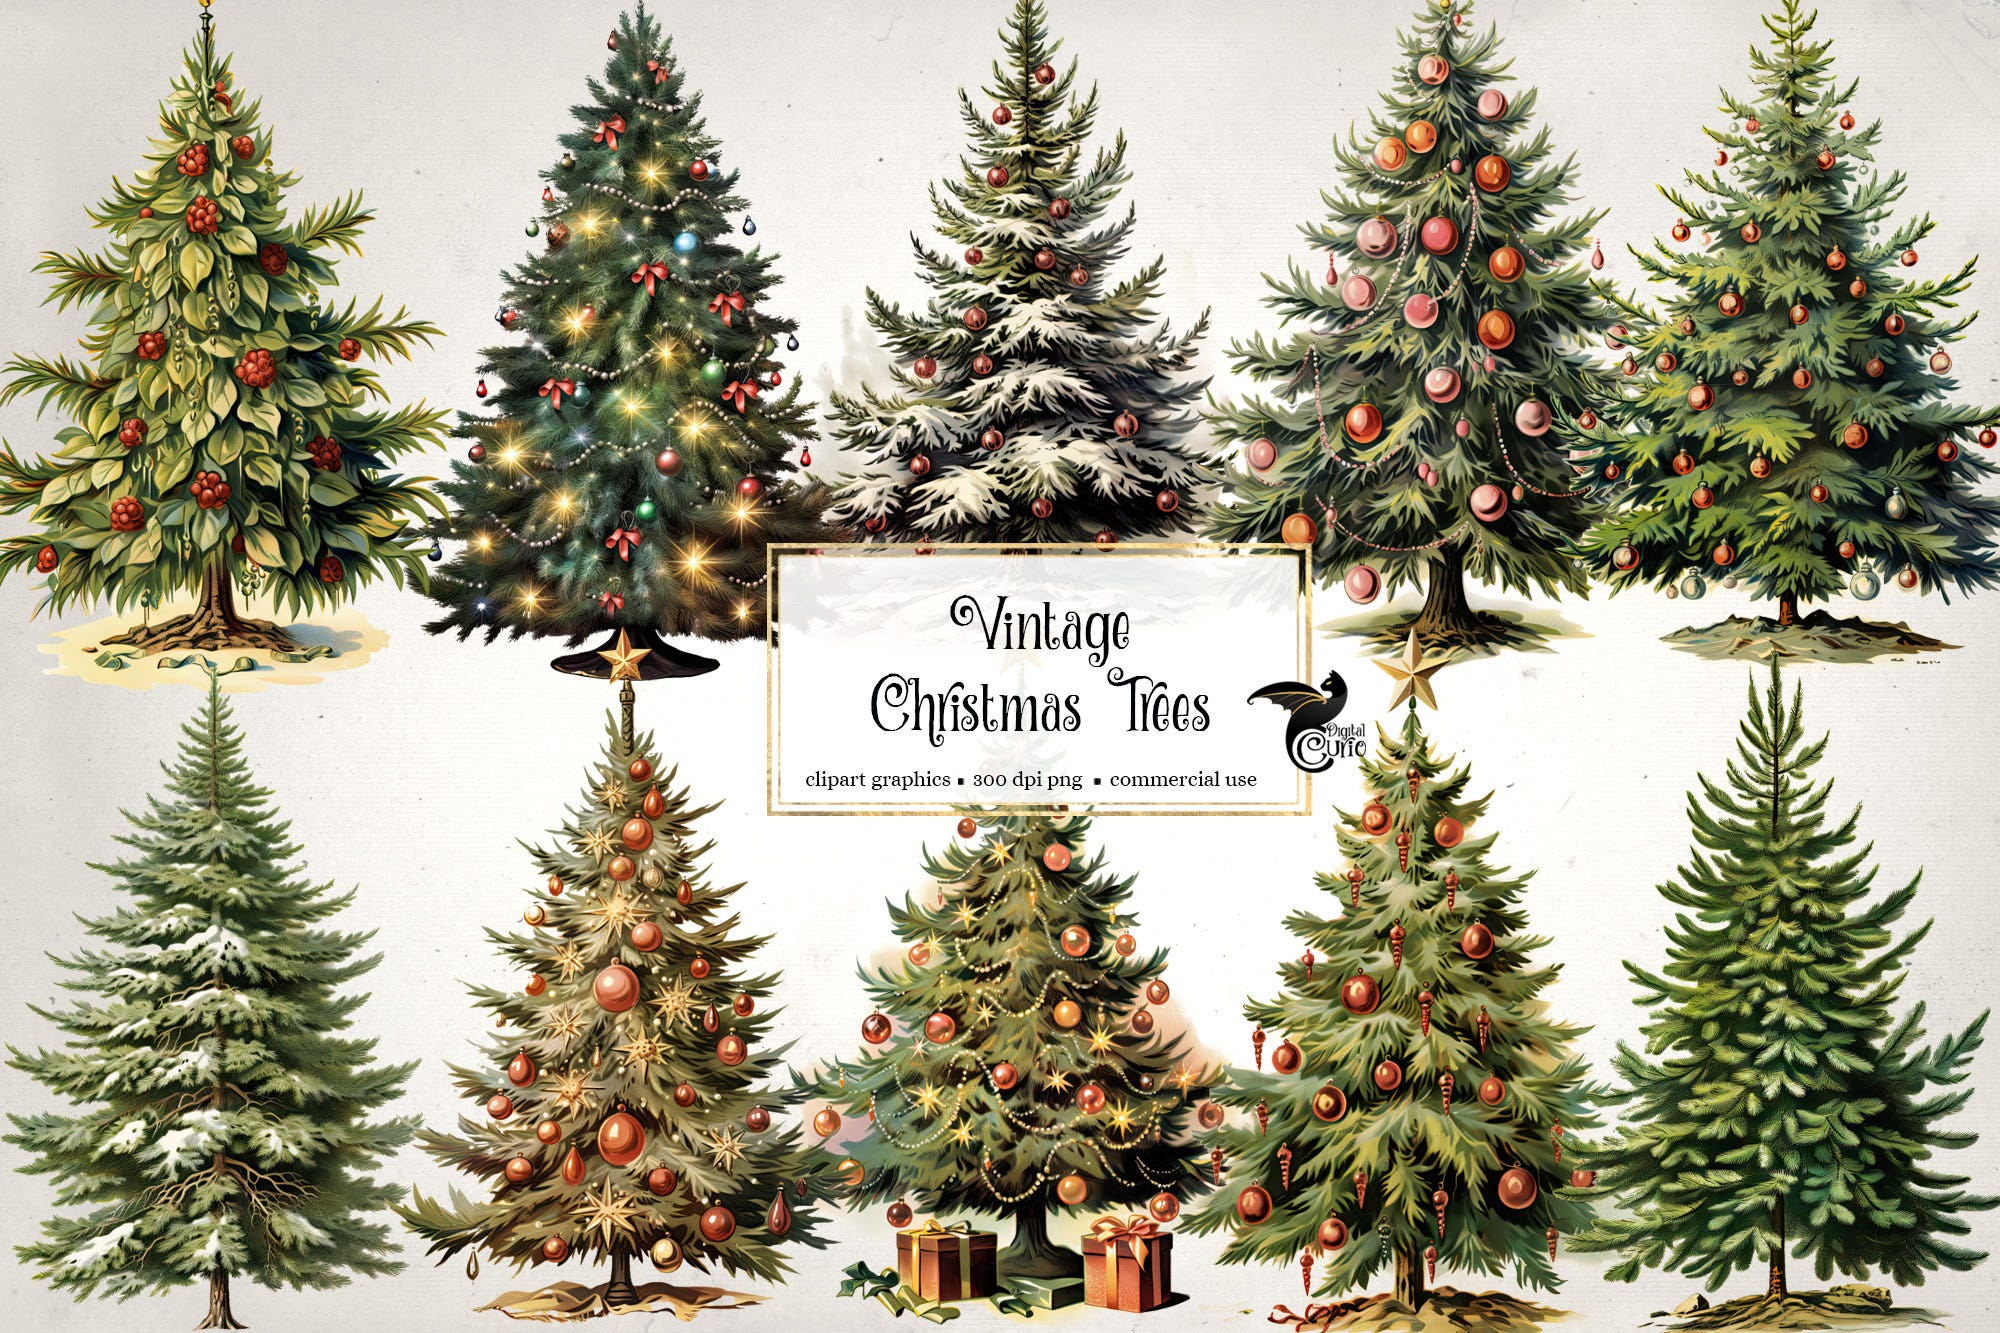 Vintage Christmas Trees Clipart - antique winter holiday clip art in PNG format instant download for commercial use